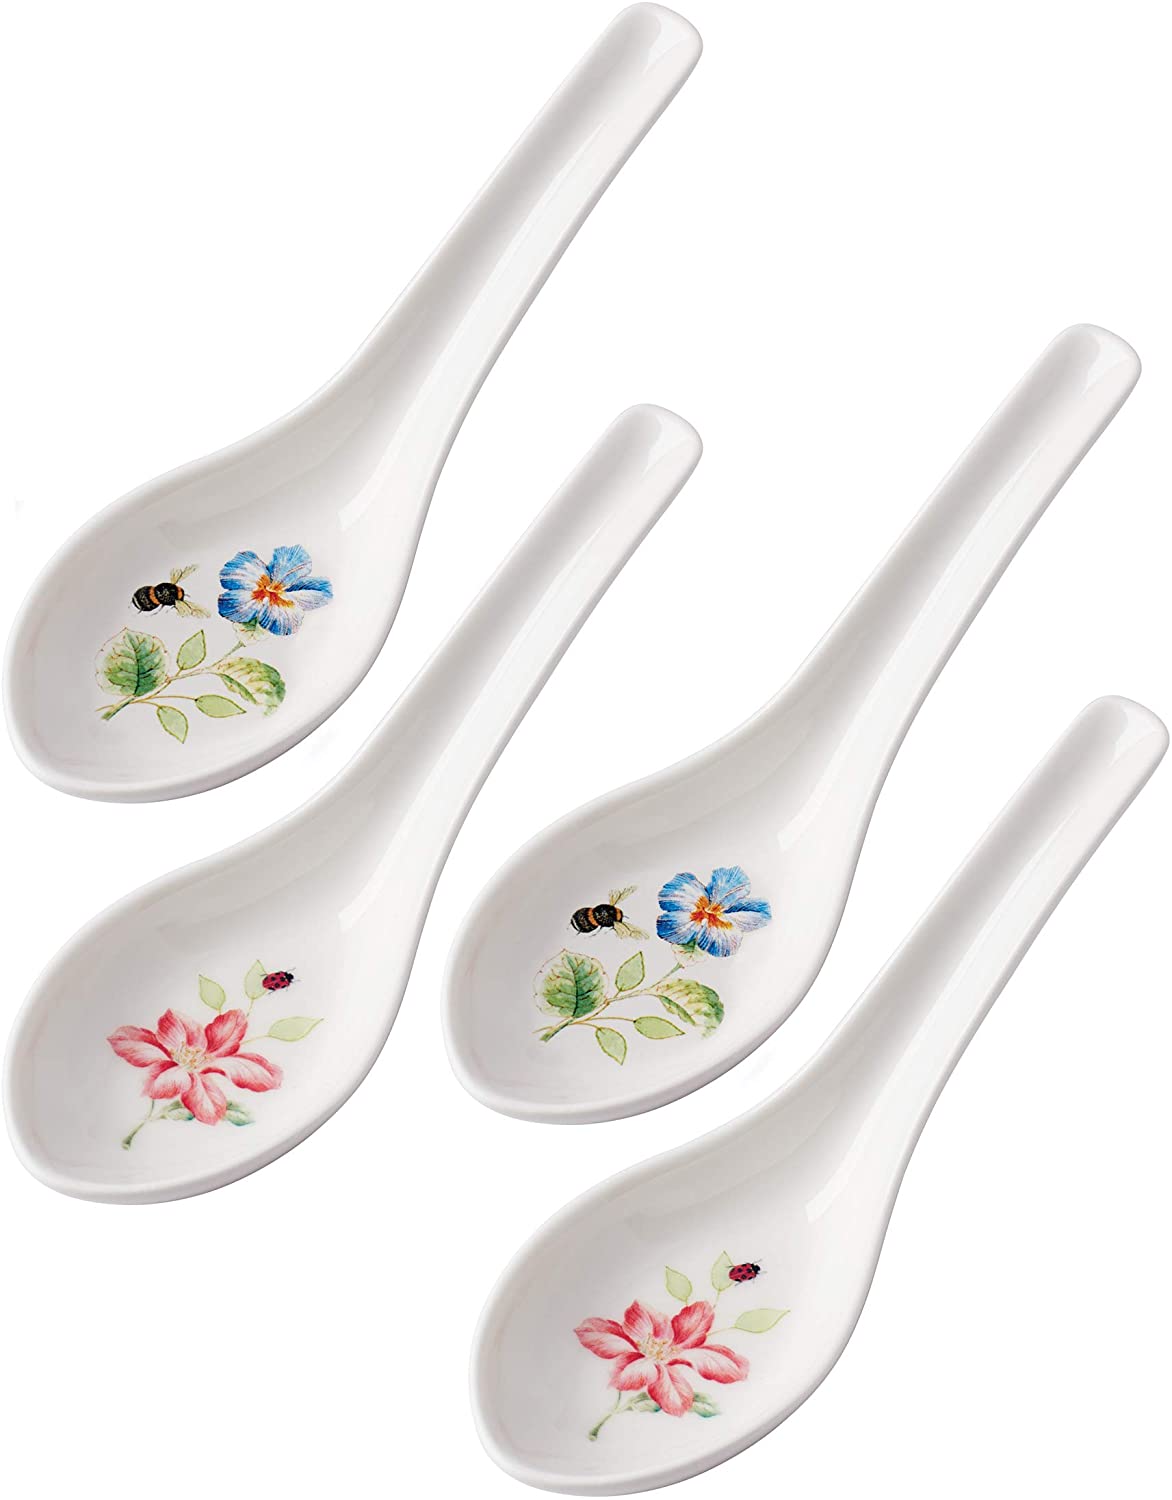 Types of Spoons:The Lenox Butterfly Meadow Soup Spoon